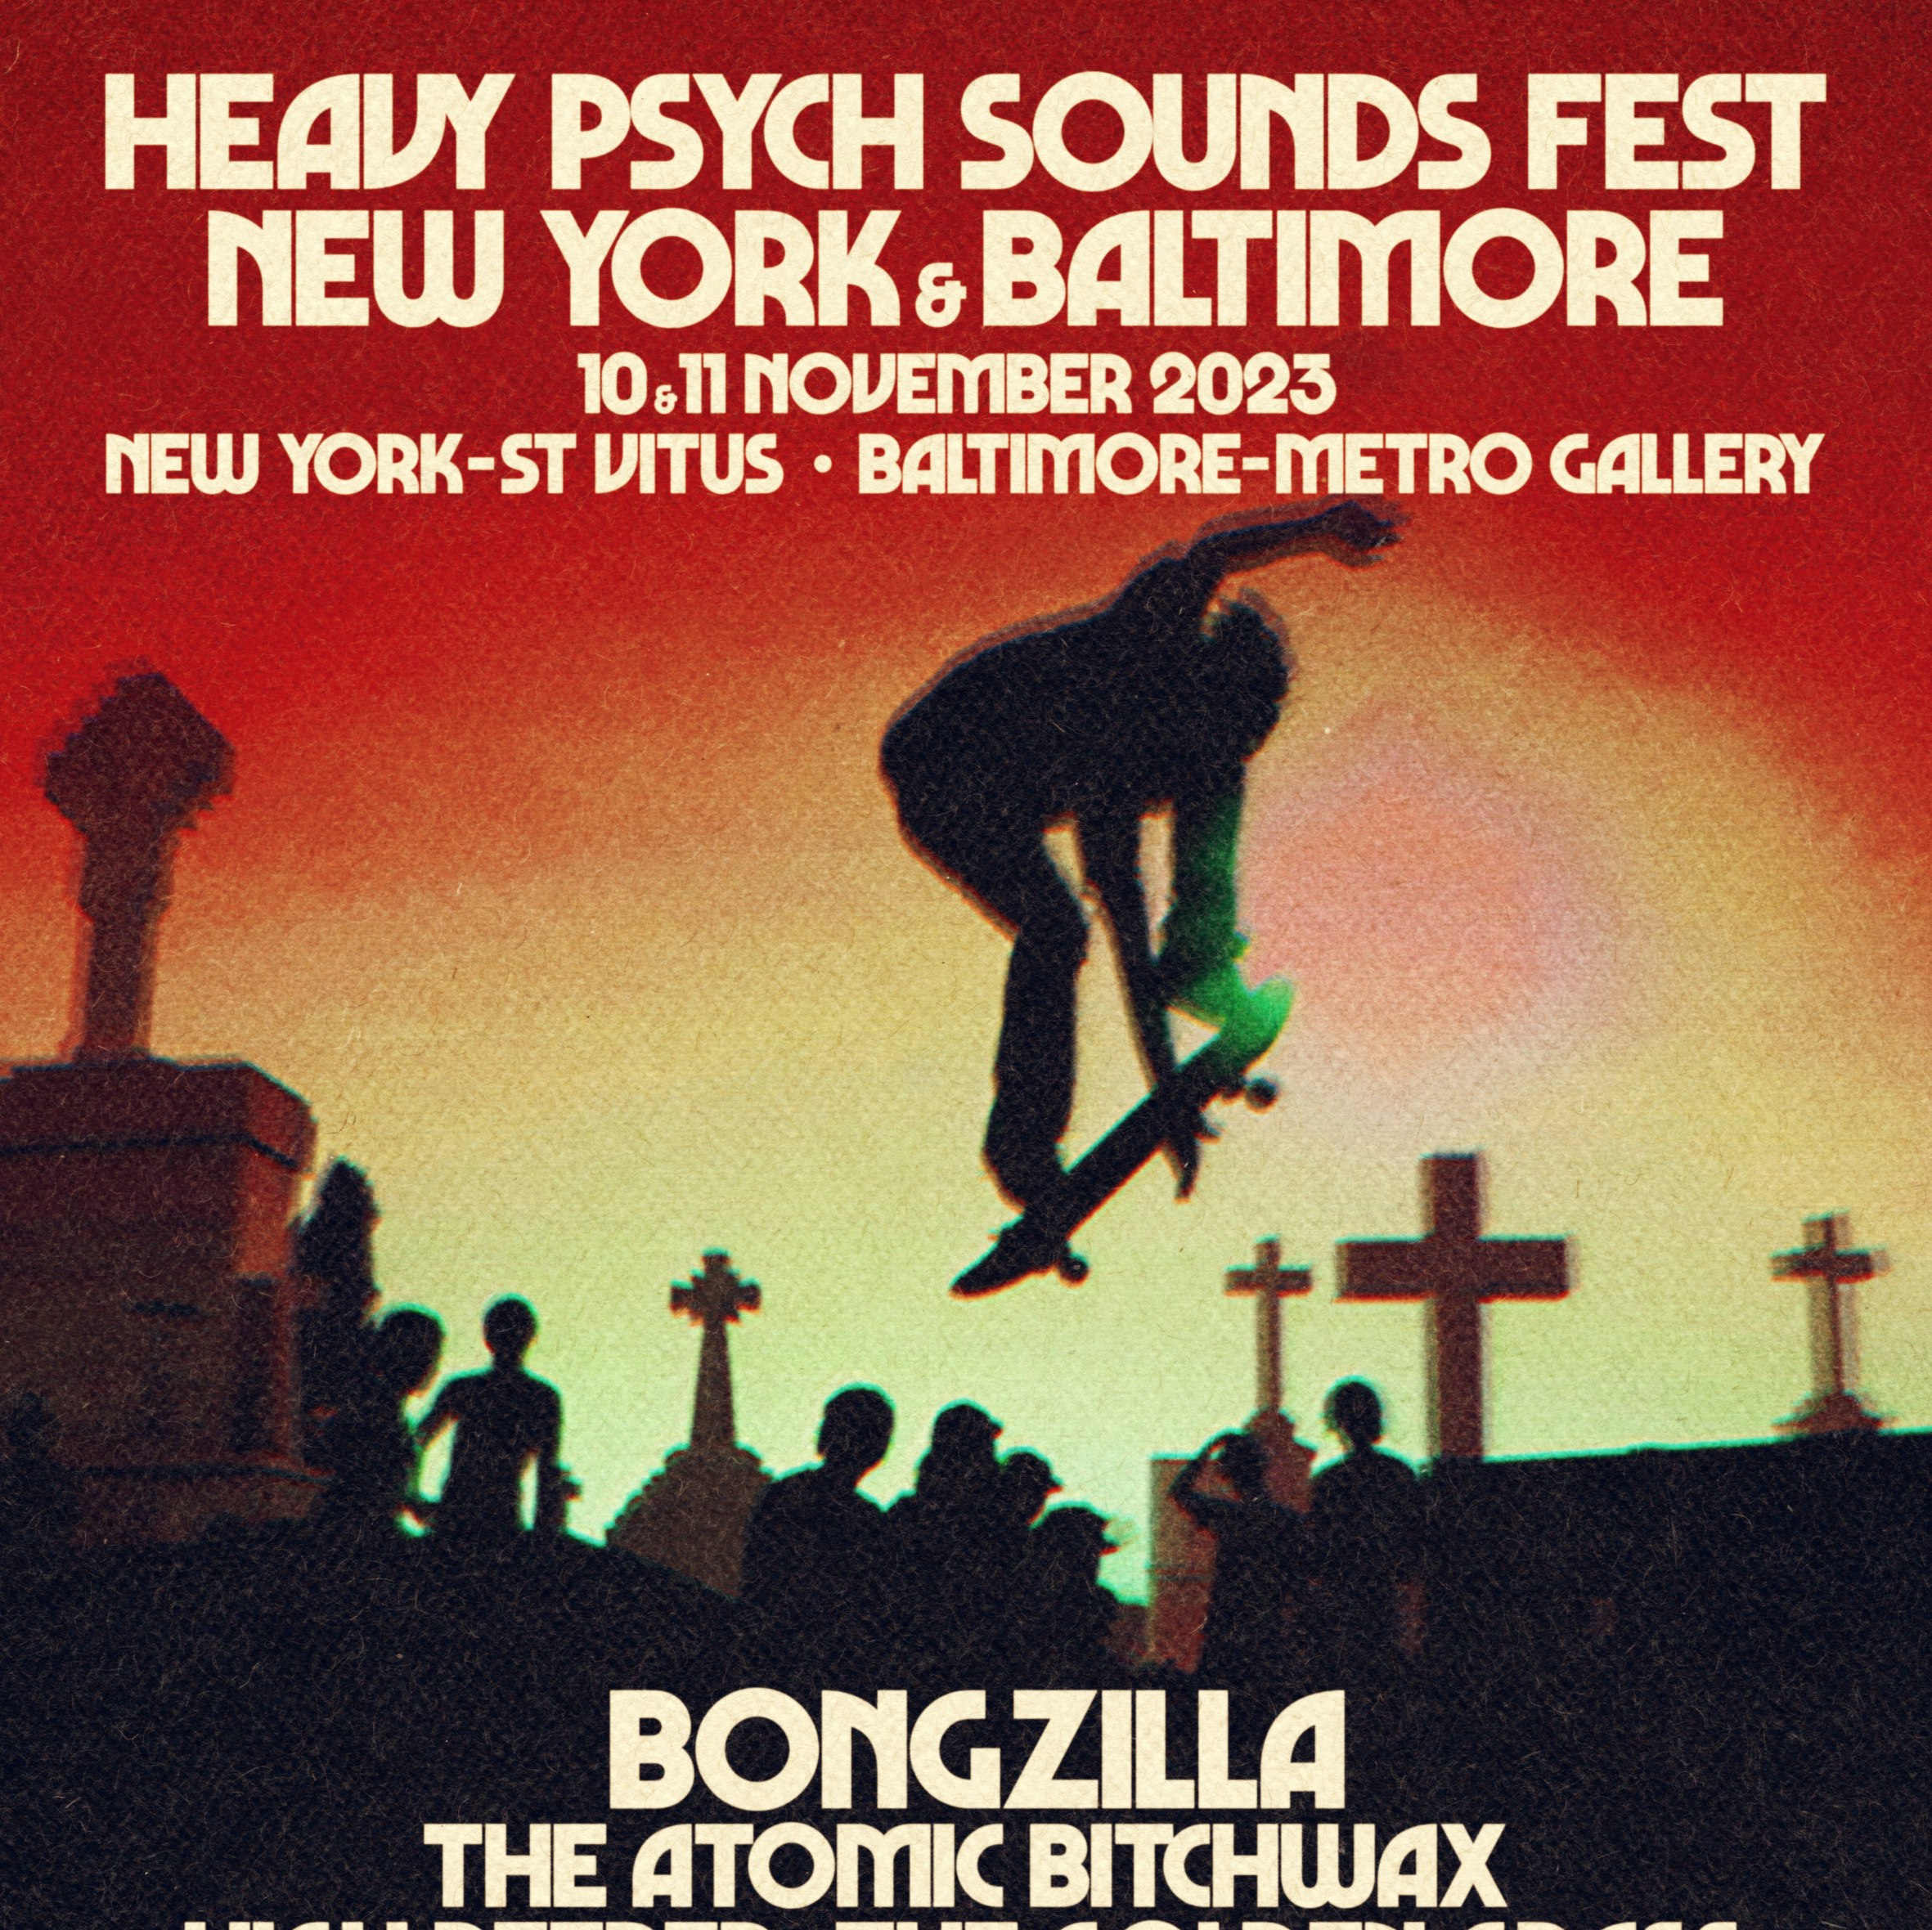 Heavy Psych Sounds Fest 2 Day Pass Featuring Bongzilla, Atomic Bitchwax, High Reeper and More!